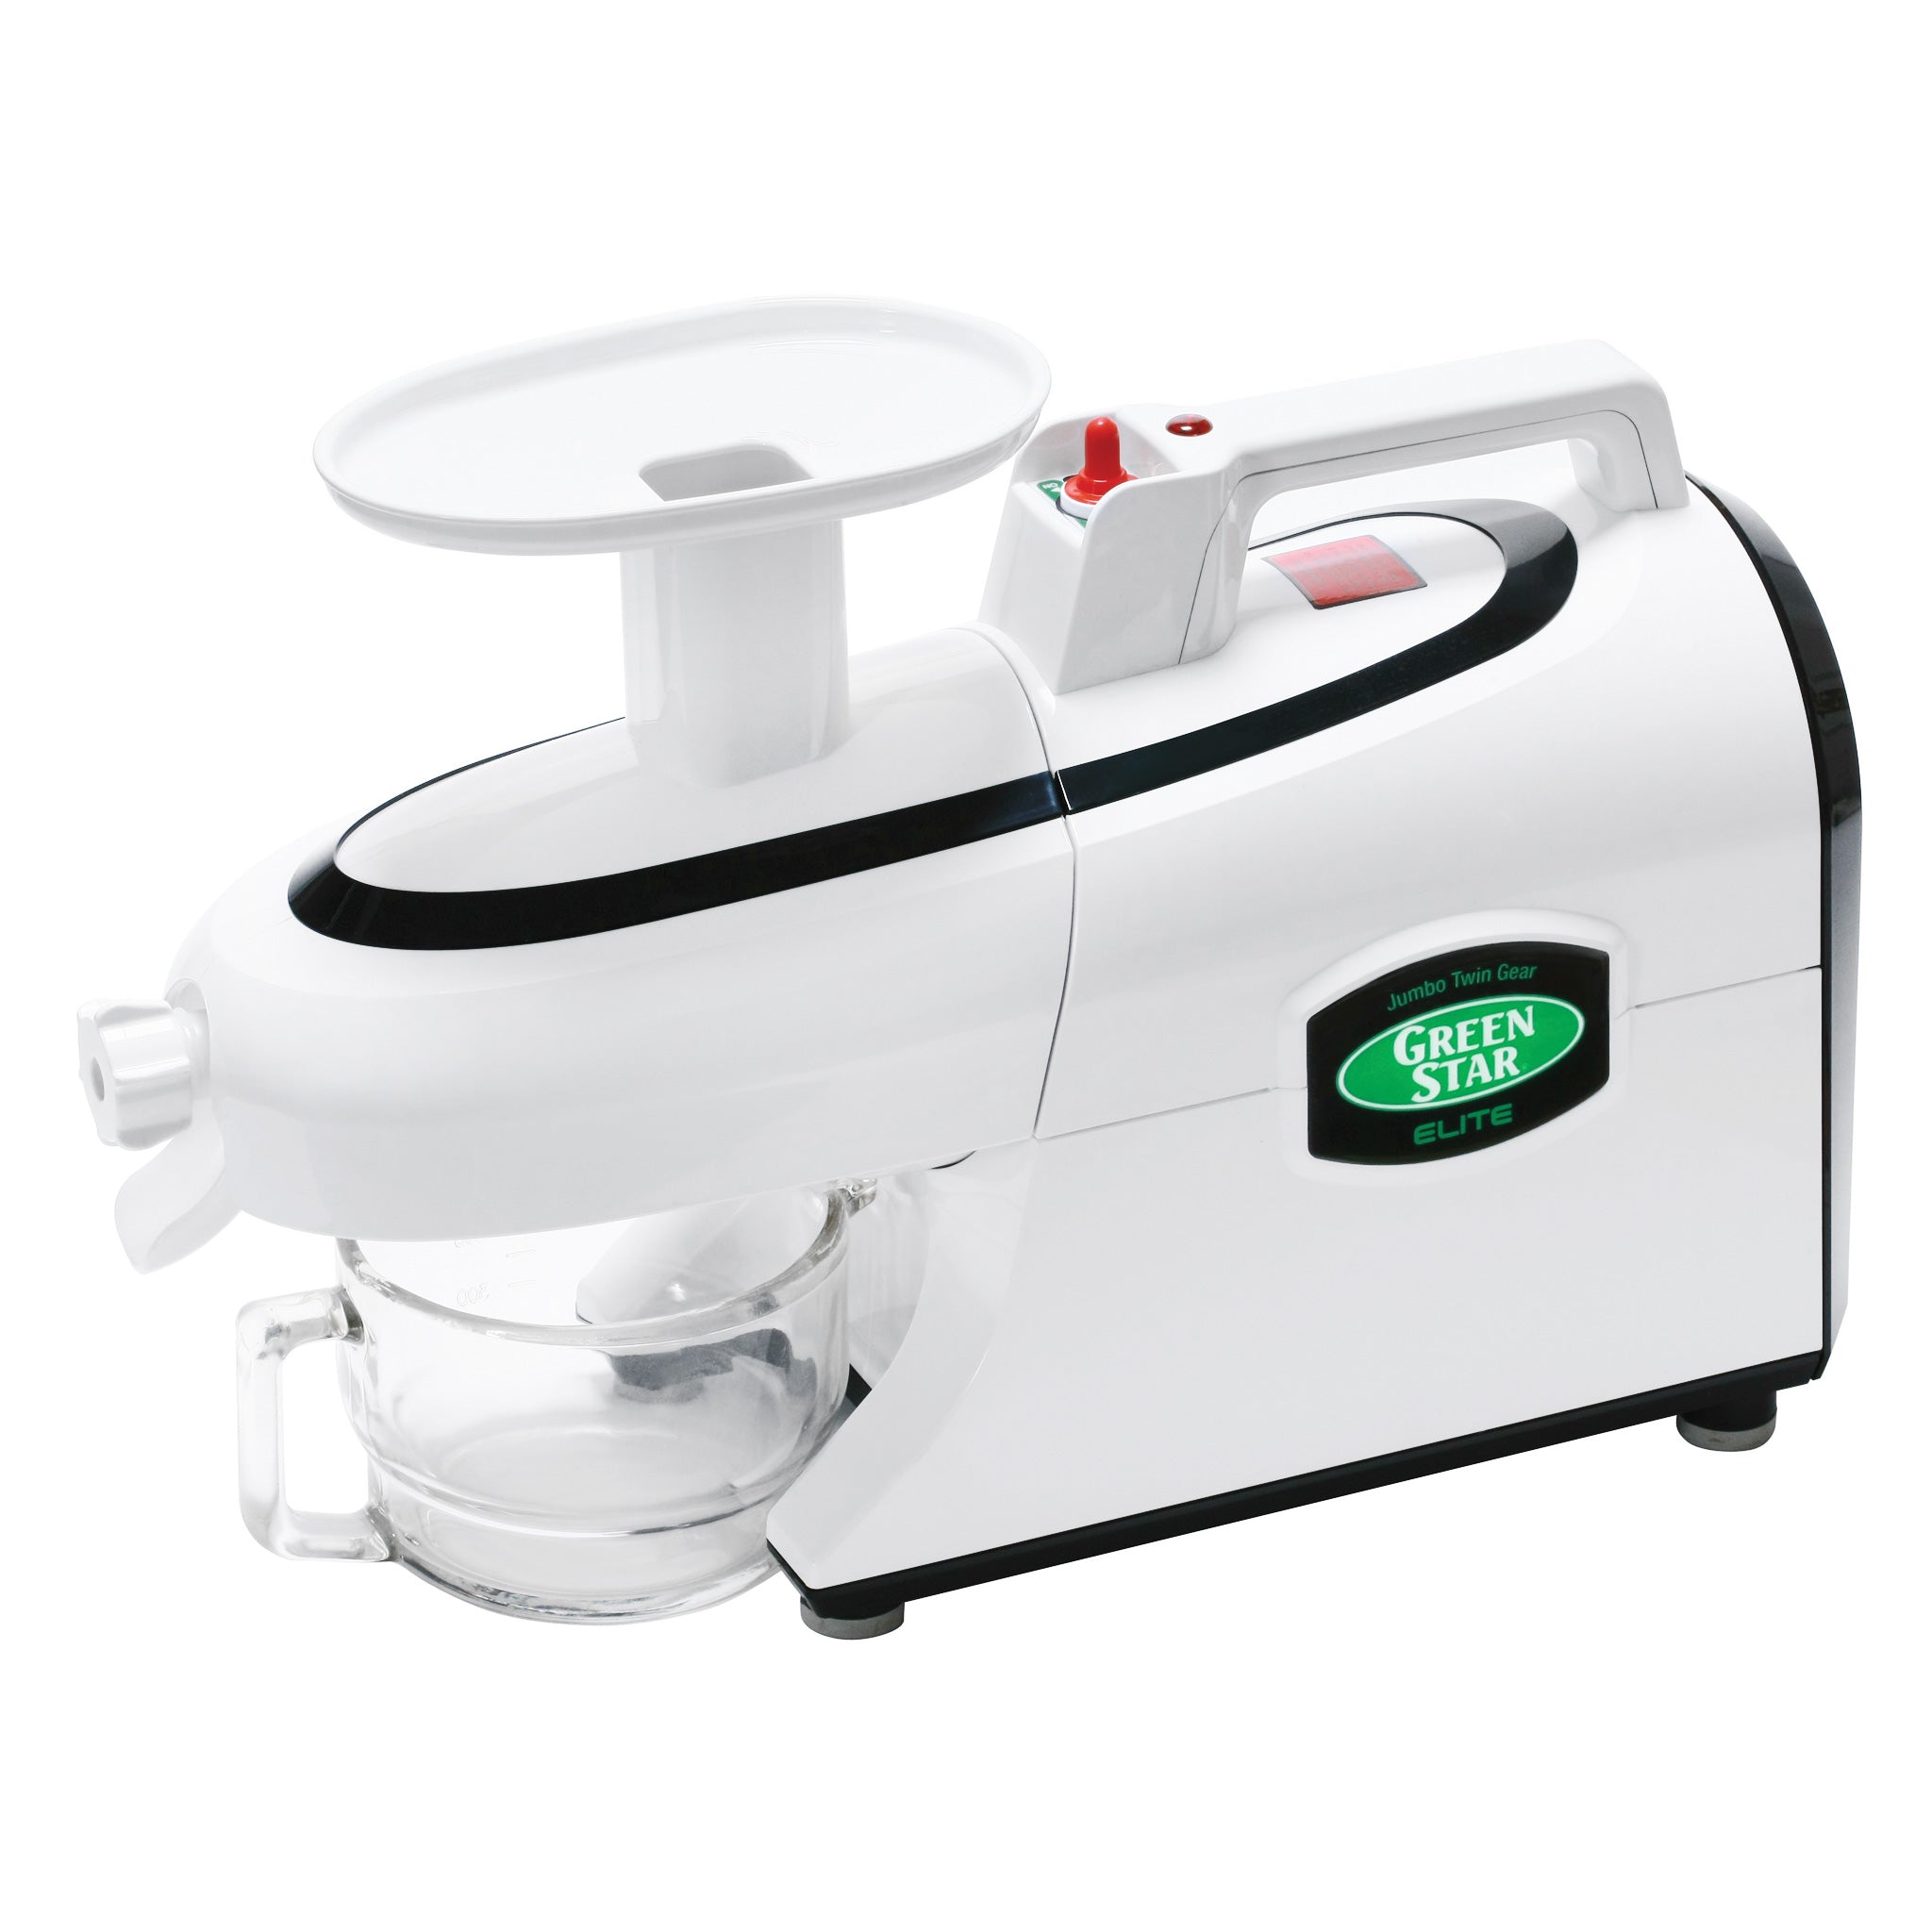 2000 ACCESSORIES HOMOGENIZING BODY WHITE/ NOT A JUICING BODY